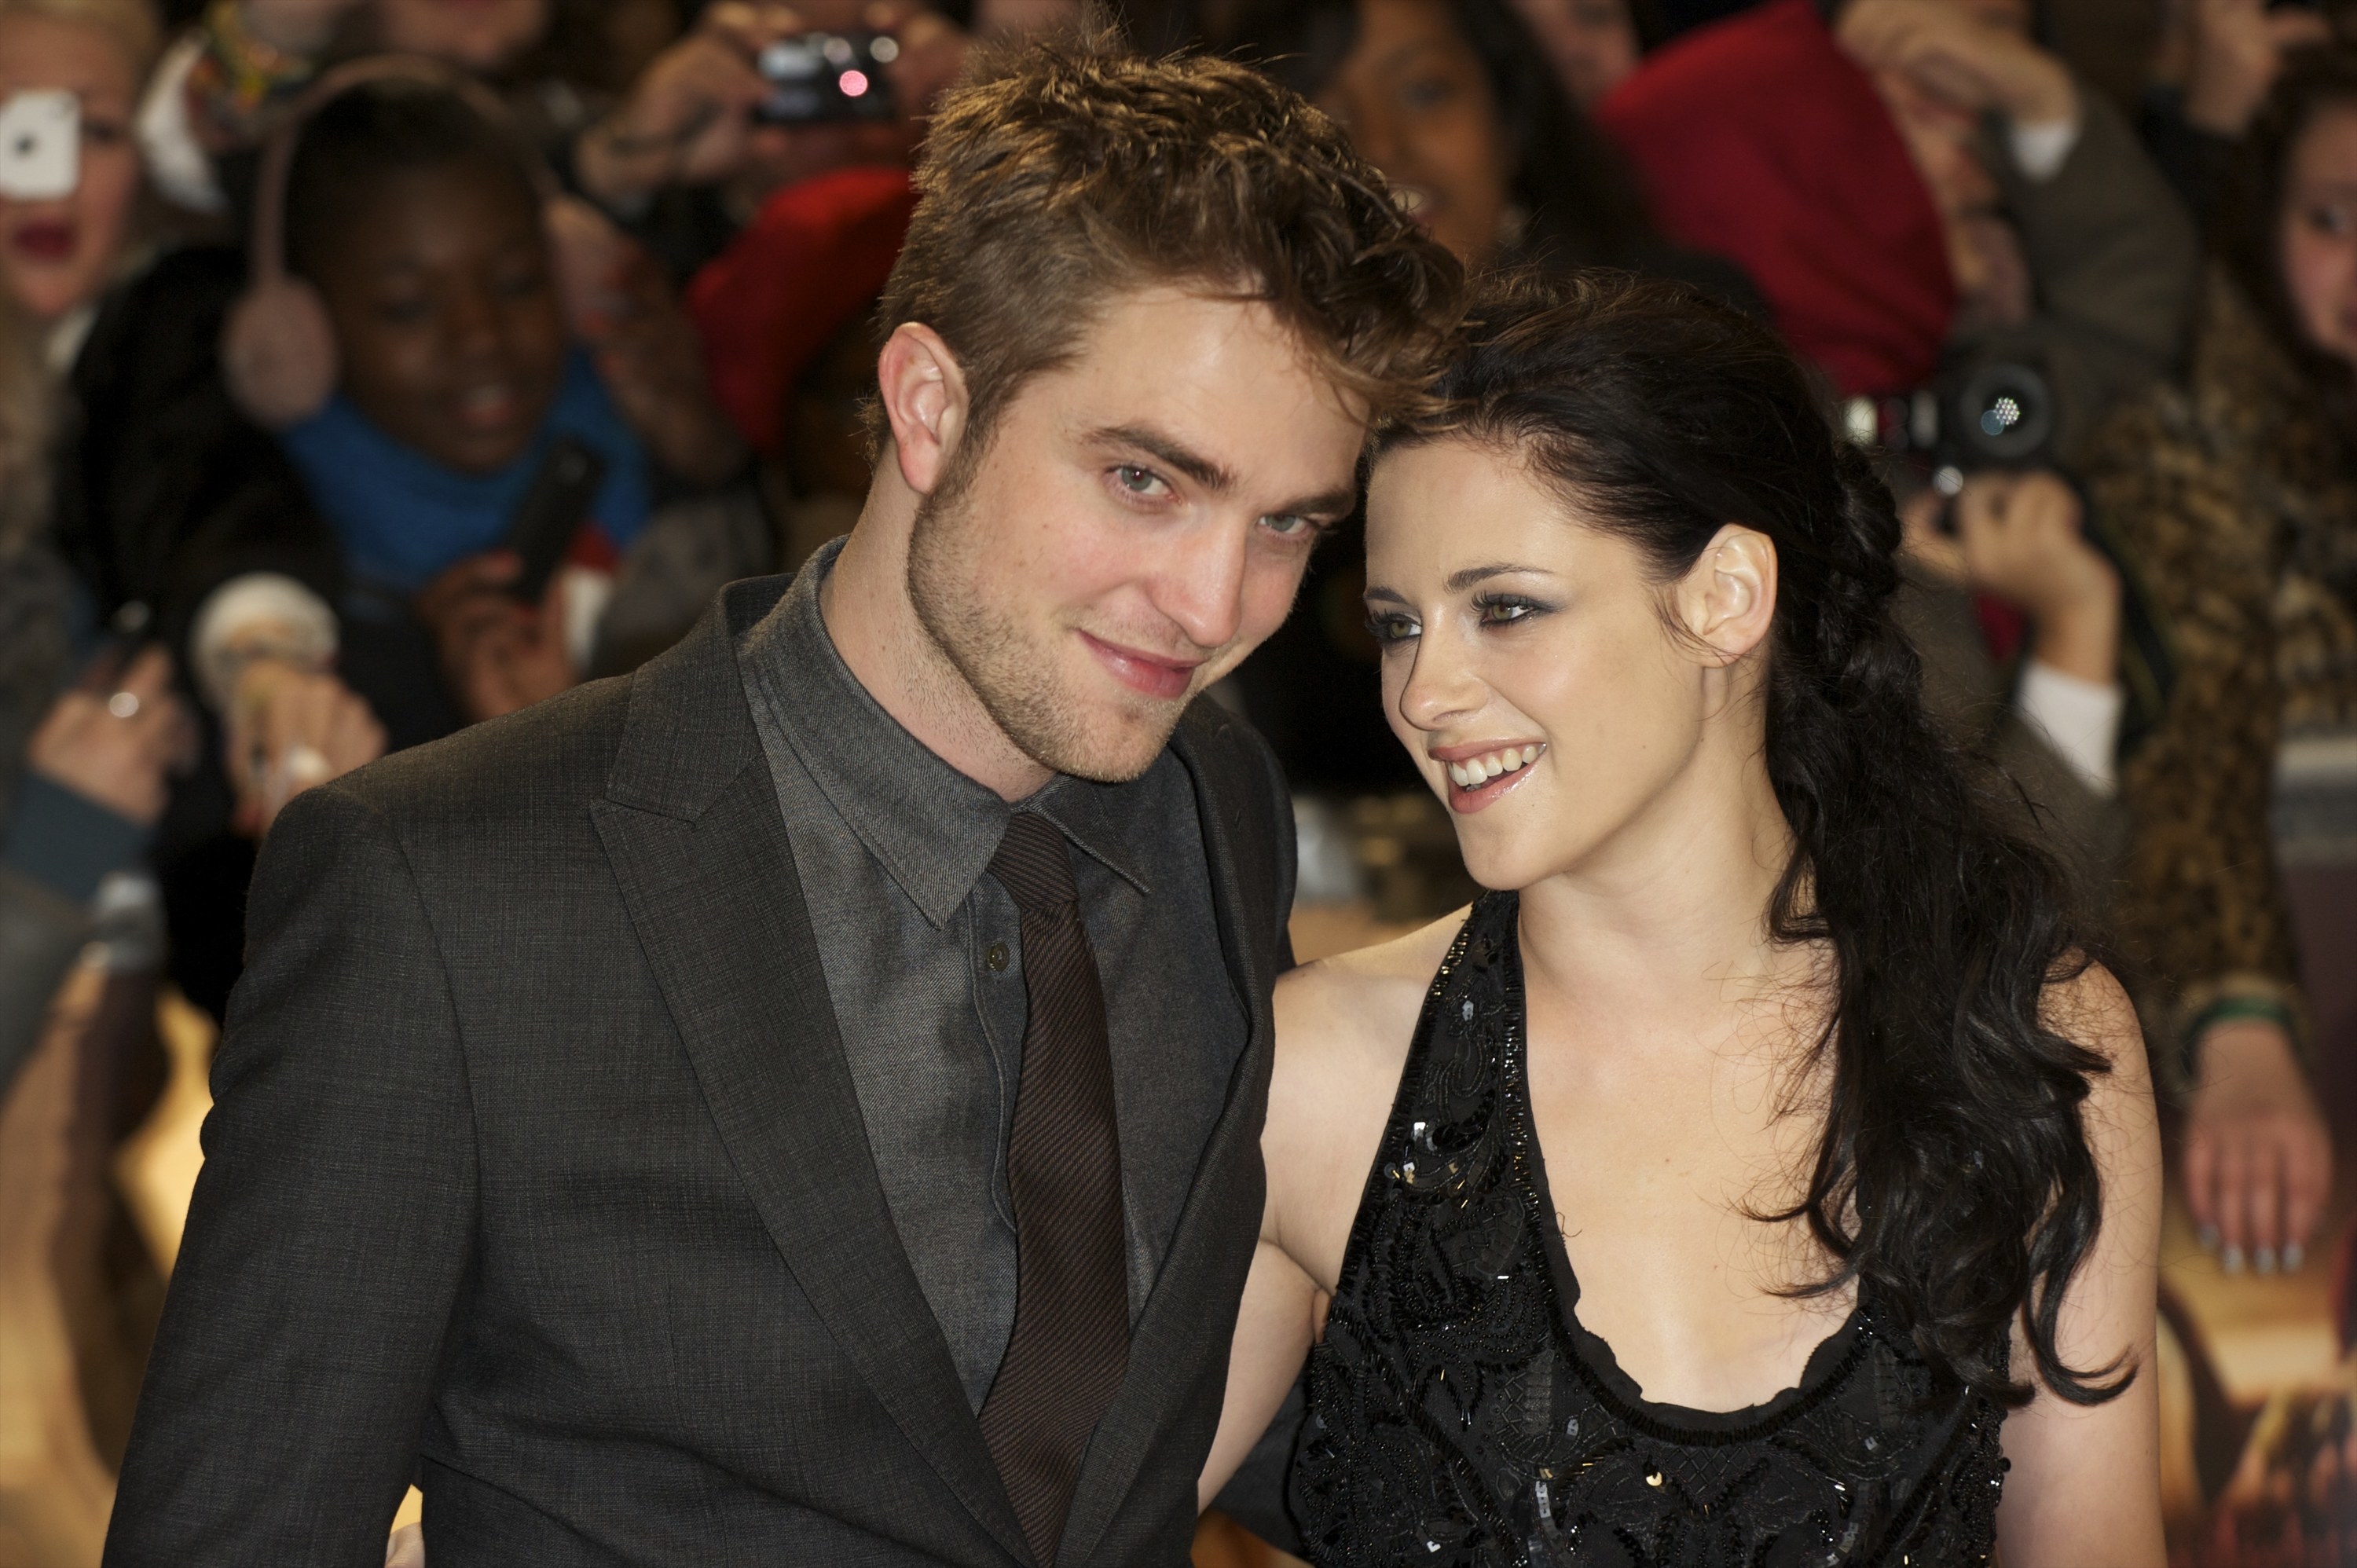 Kristen and Robert pose together at an event